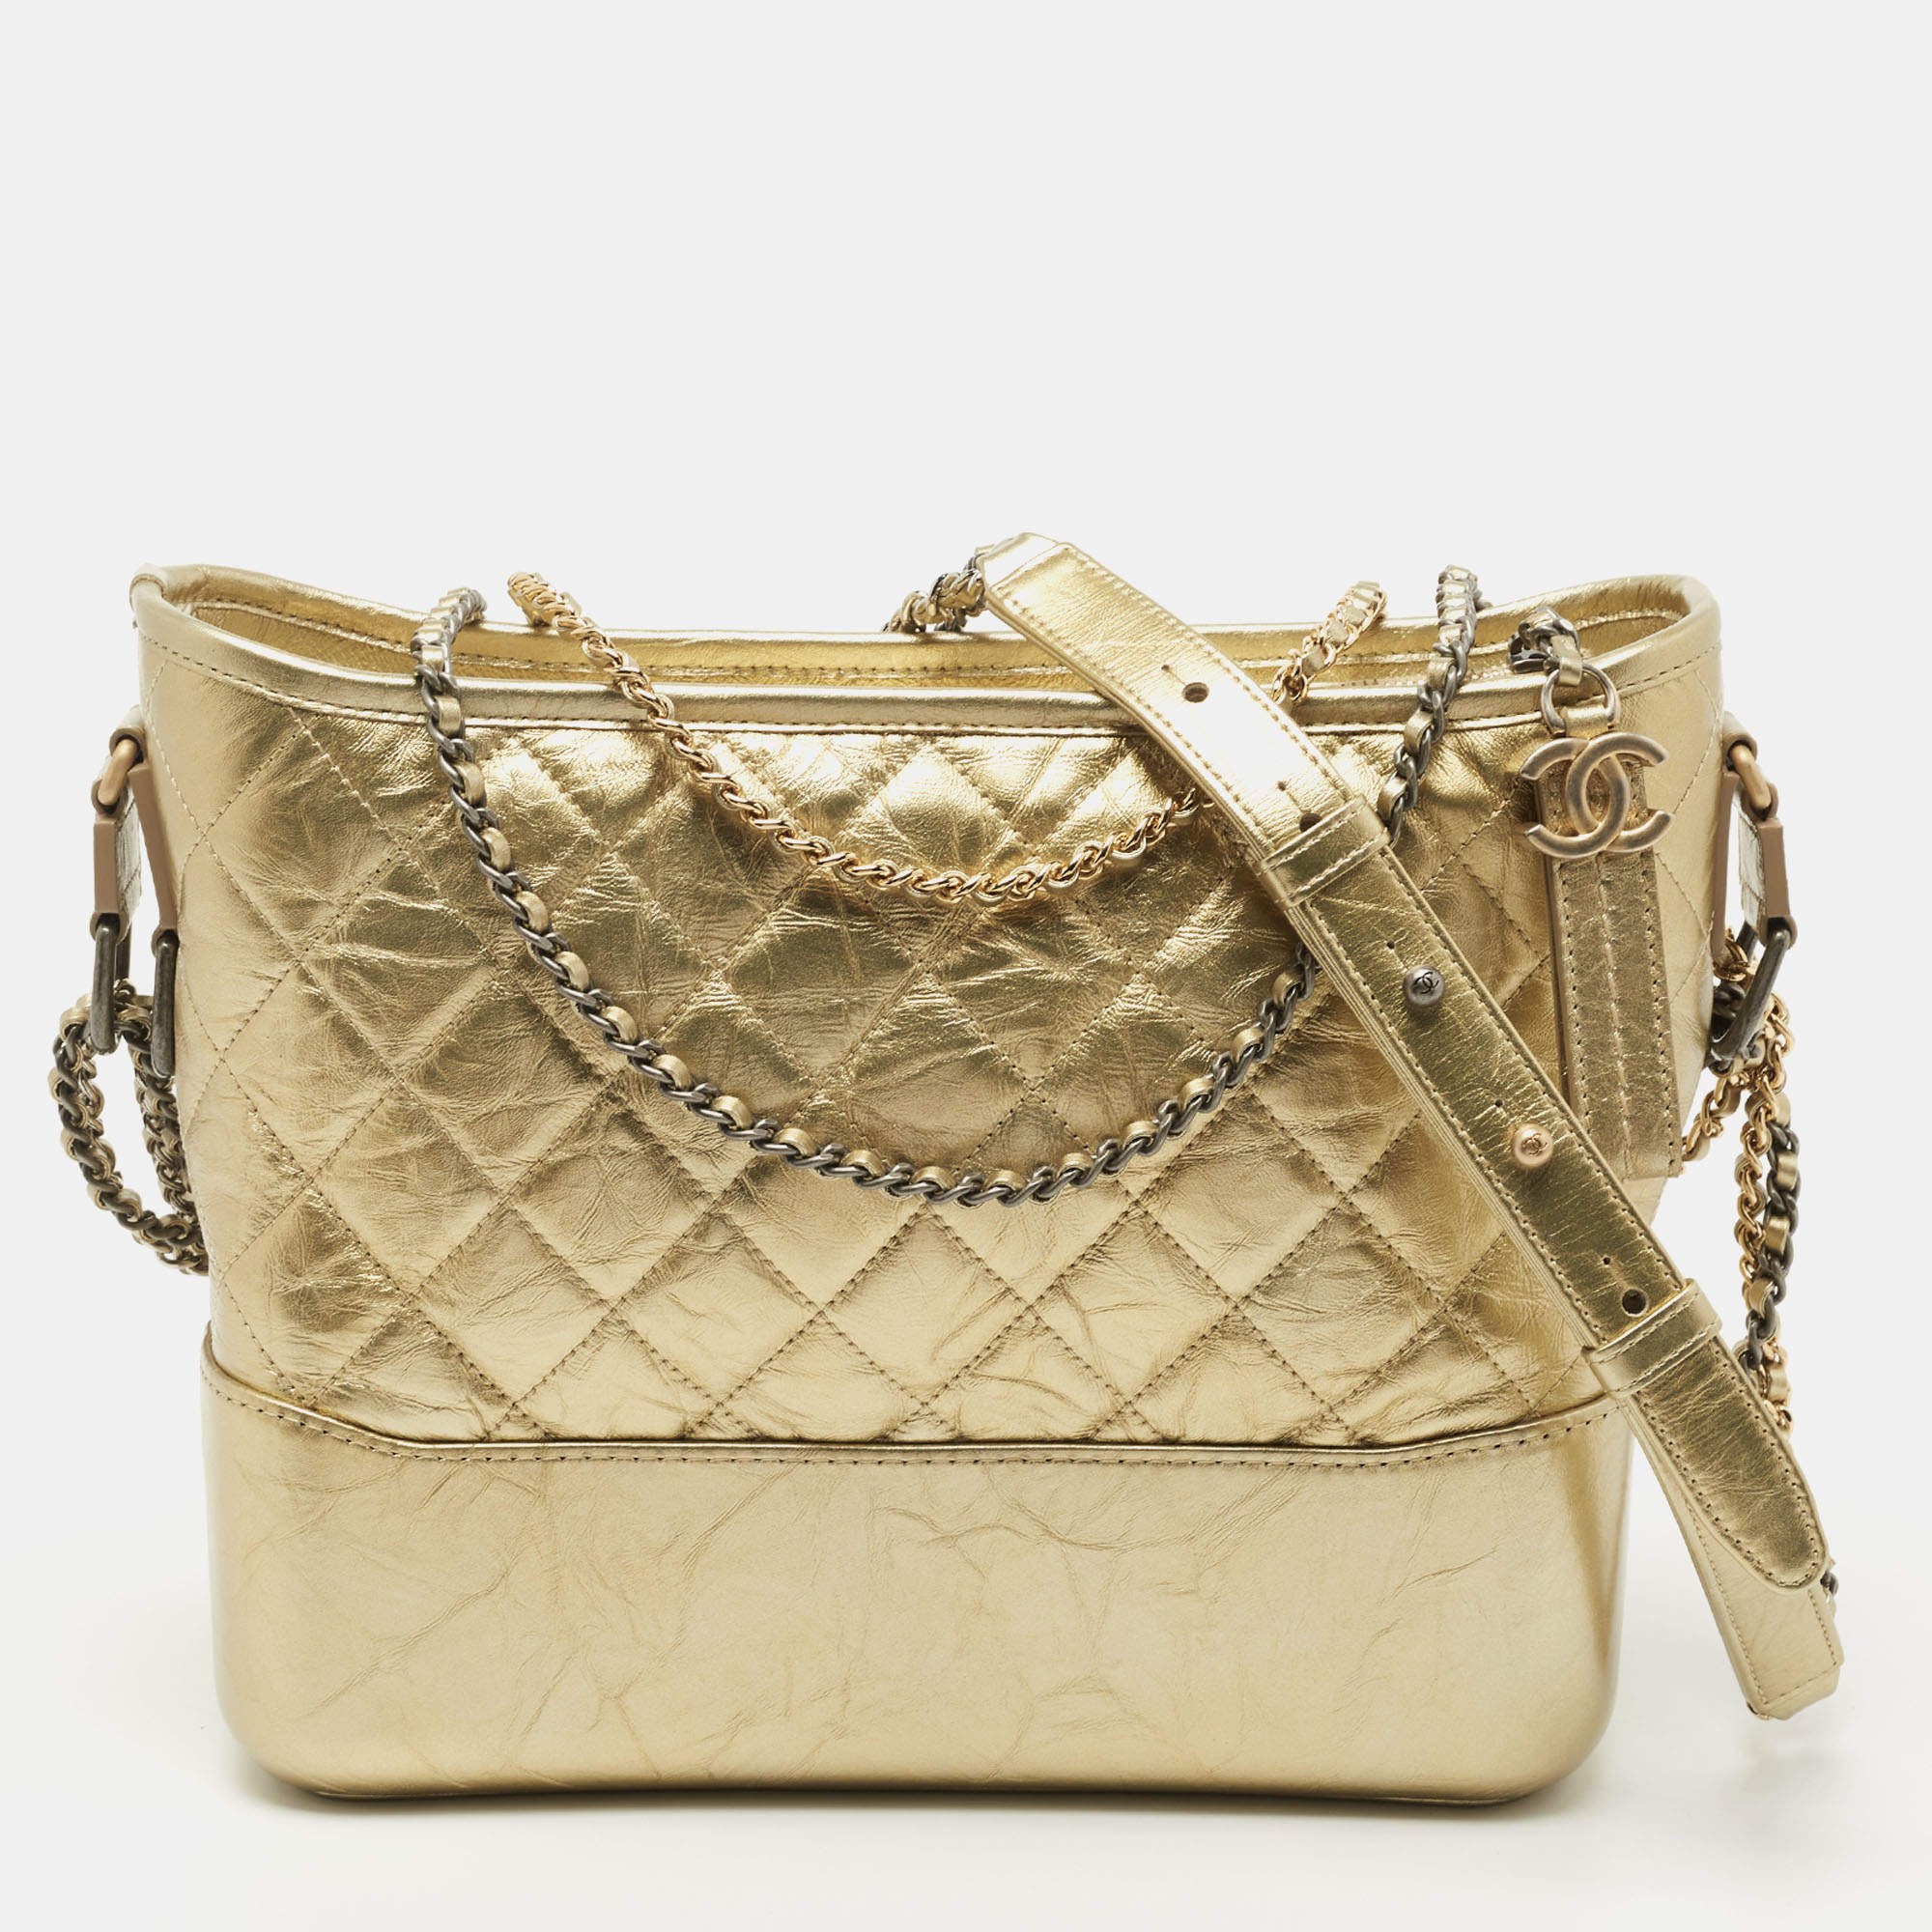 Chanel Metallic Gold Quilted Leather Large Gabrielle Hobo